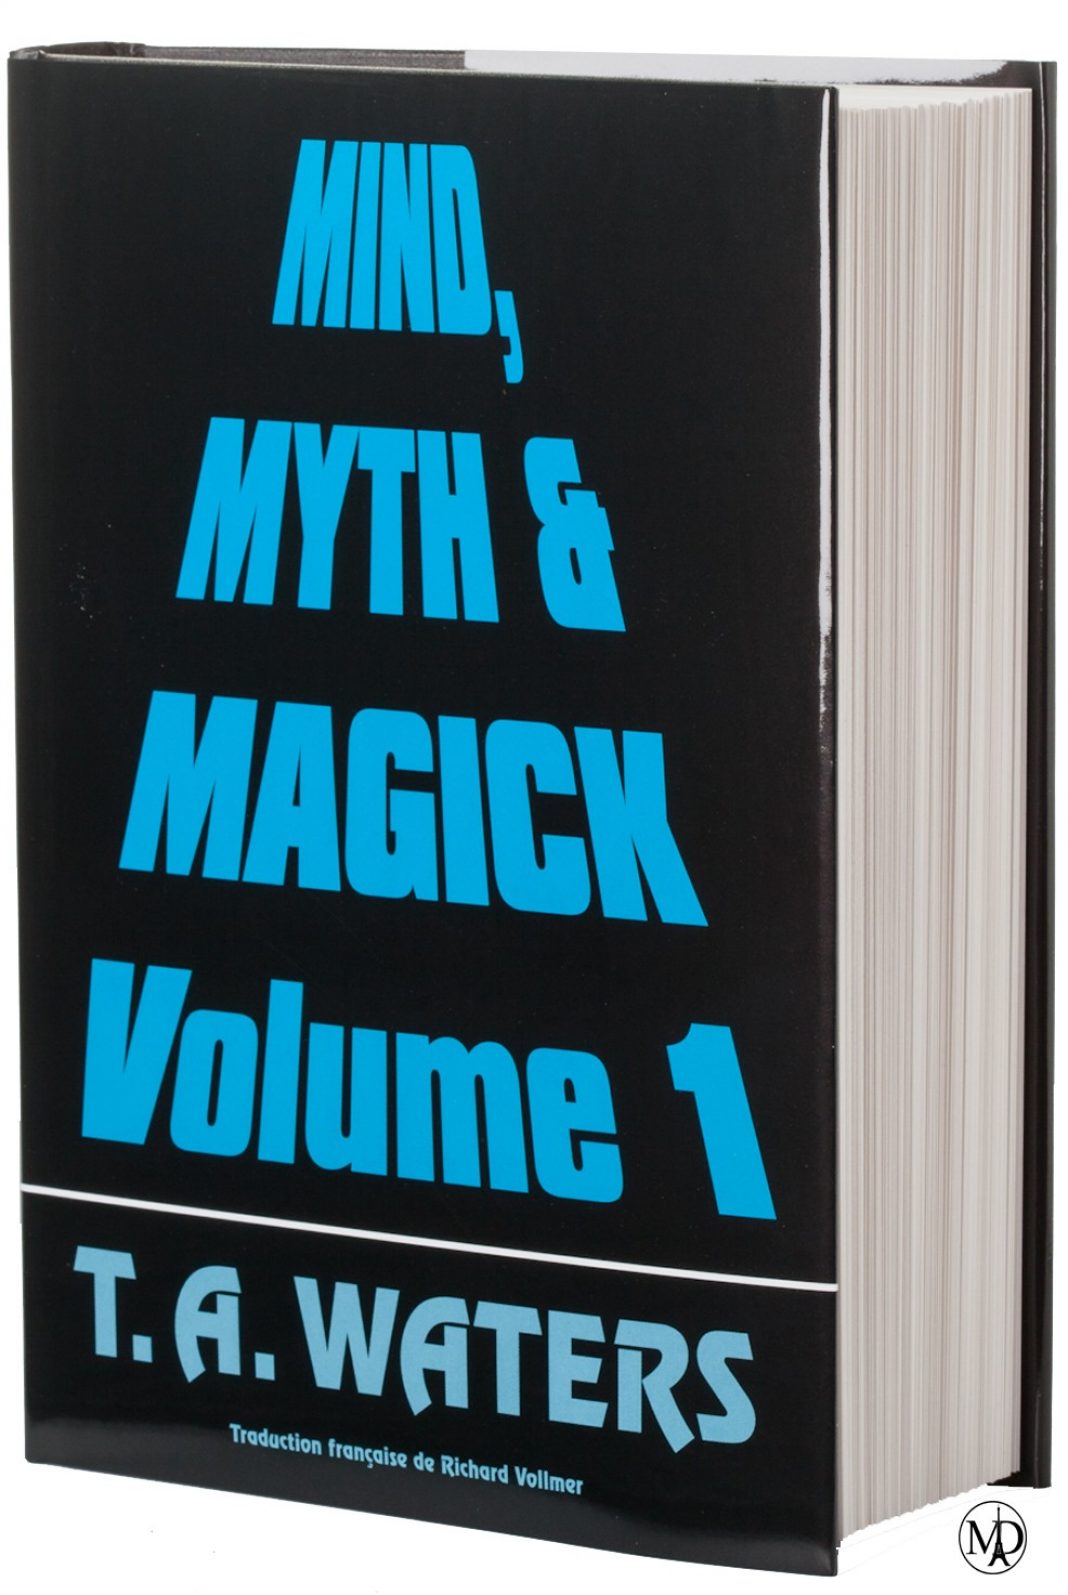 Mind, Myth and Magick Volume 1 de T.A. WATERS